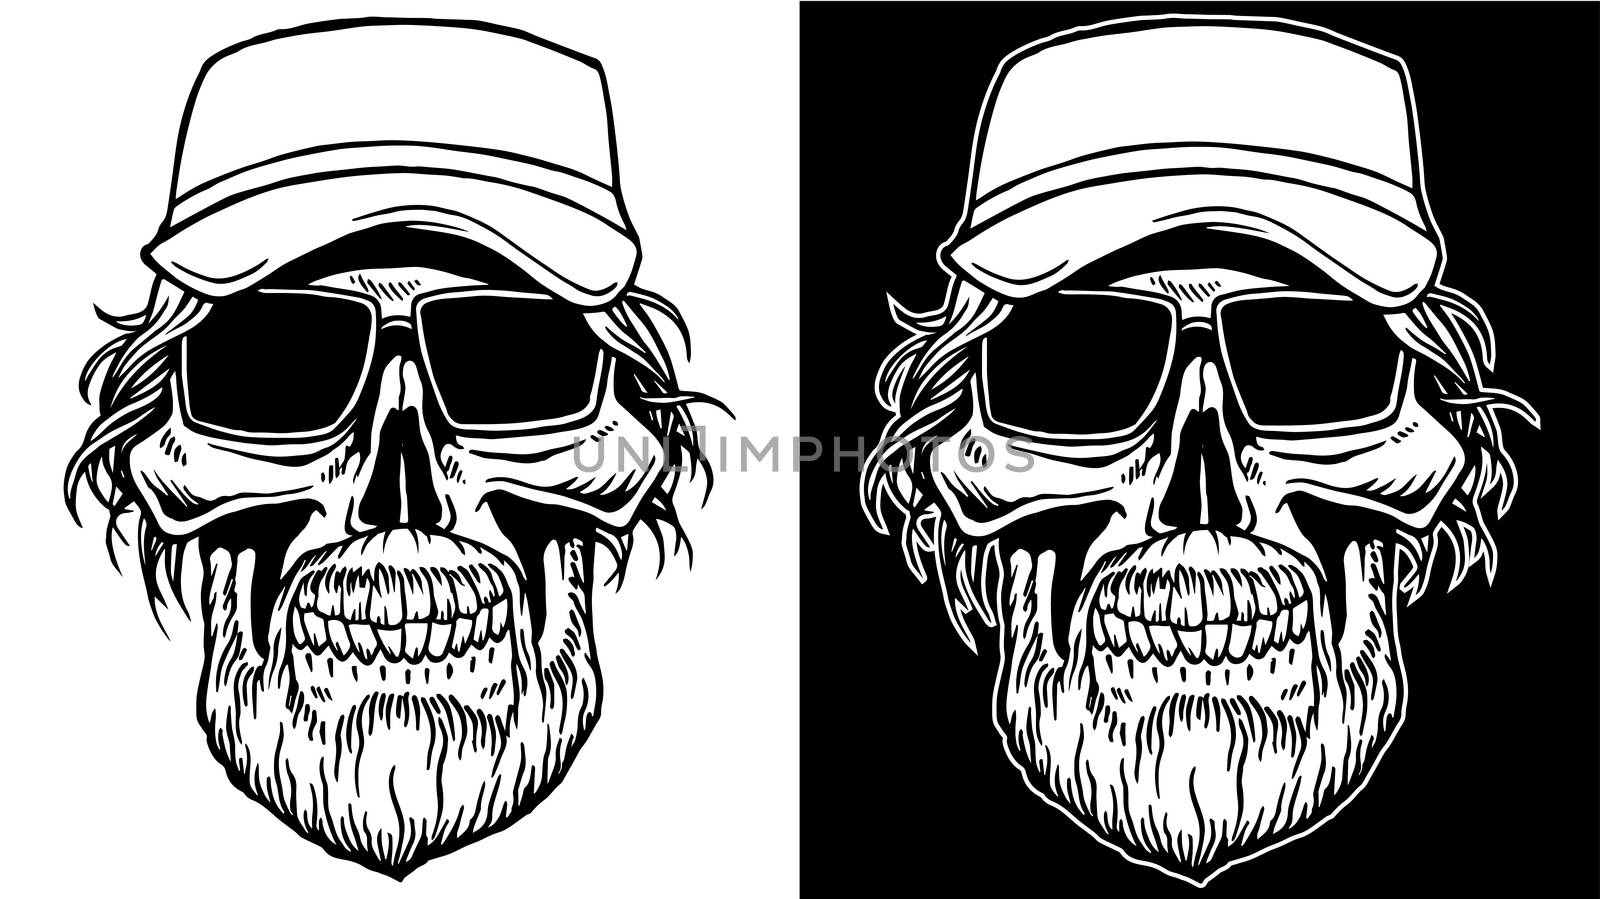 Black and White Line art of Skull with beard and sunglasses by illstudio